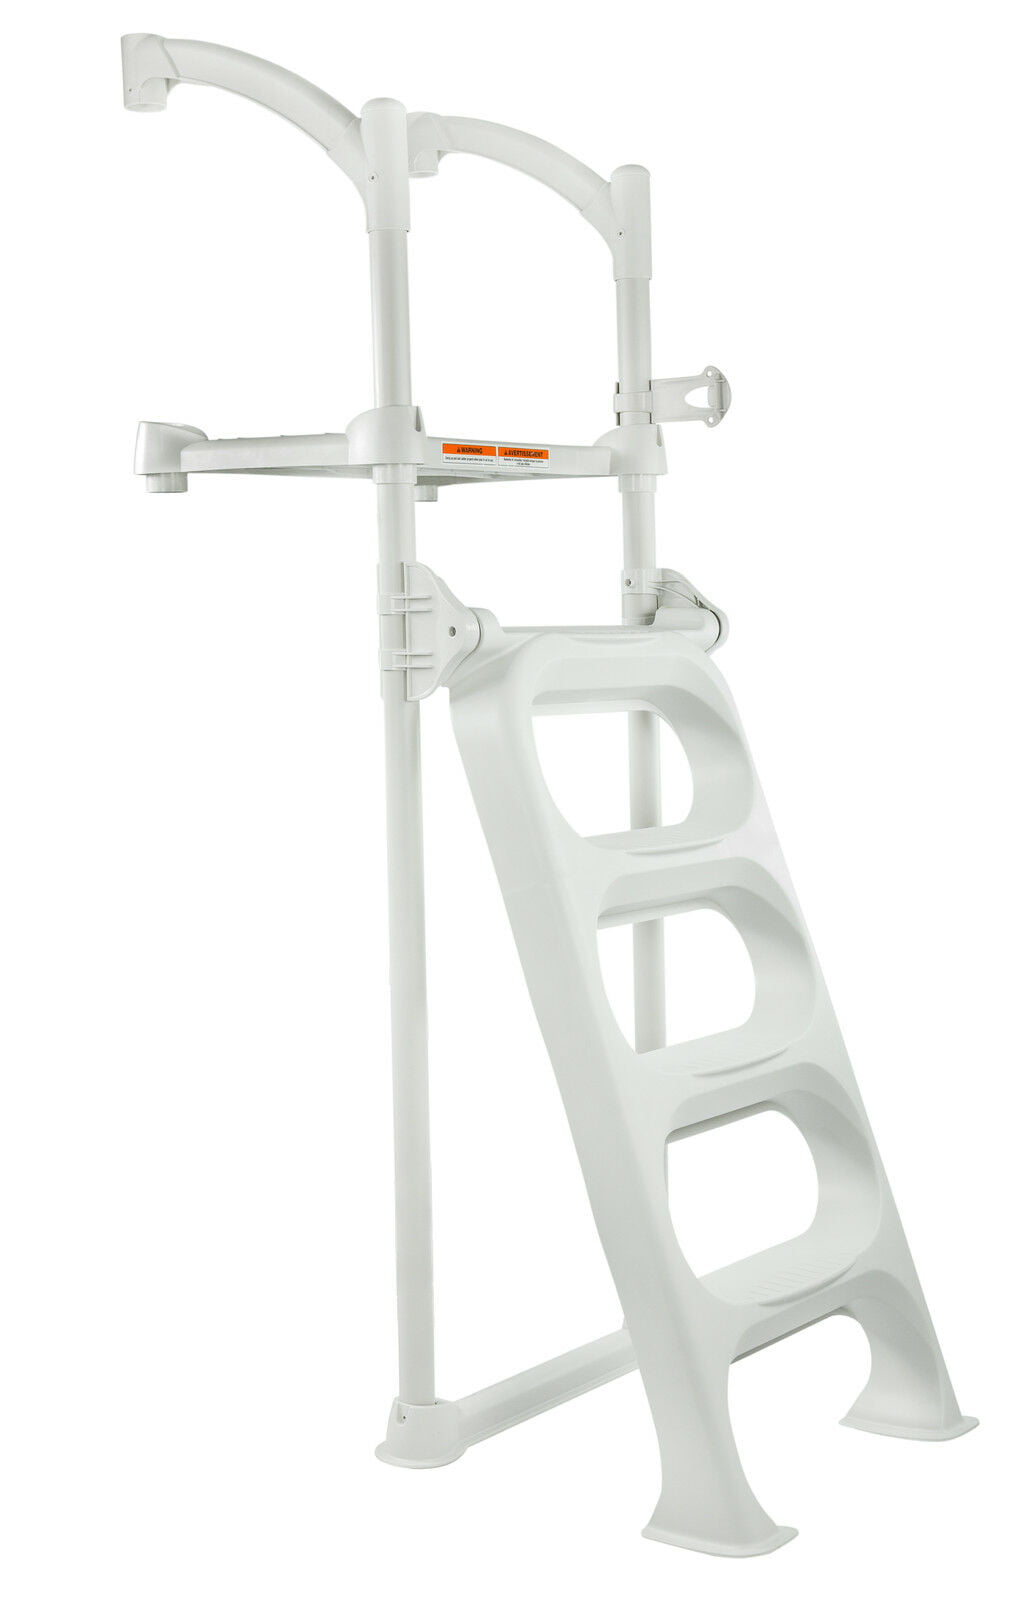 Yc Swimming Pool Ladder Double-Sided Ladder Suitable for Above Ground Steel Frame or Inflatable Swimming Pools 33inch Grey 